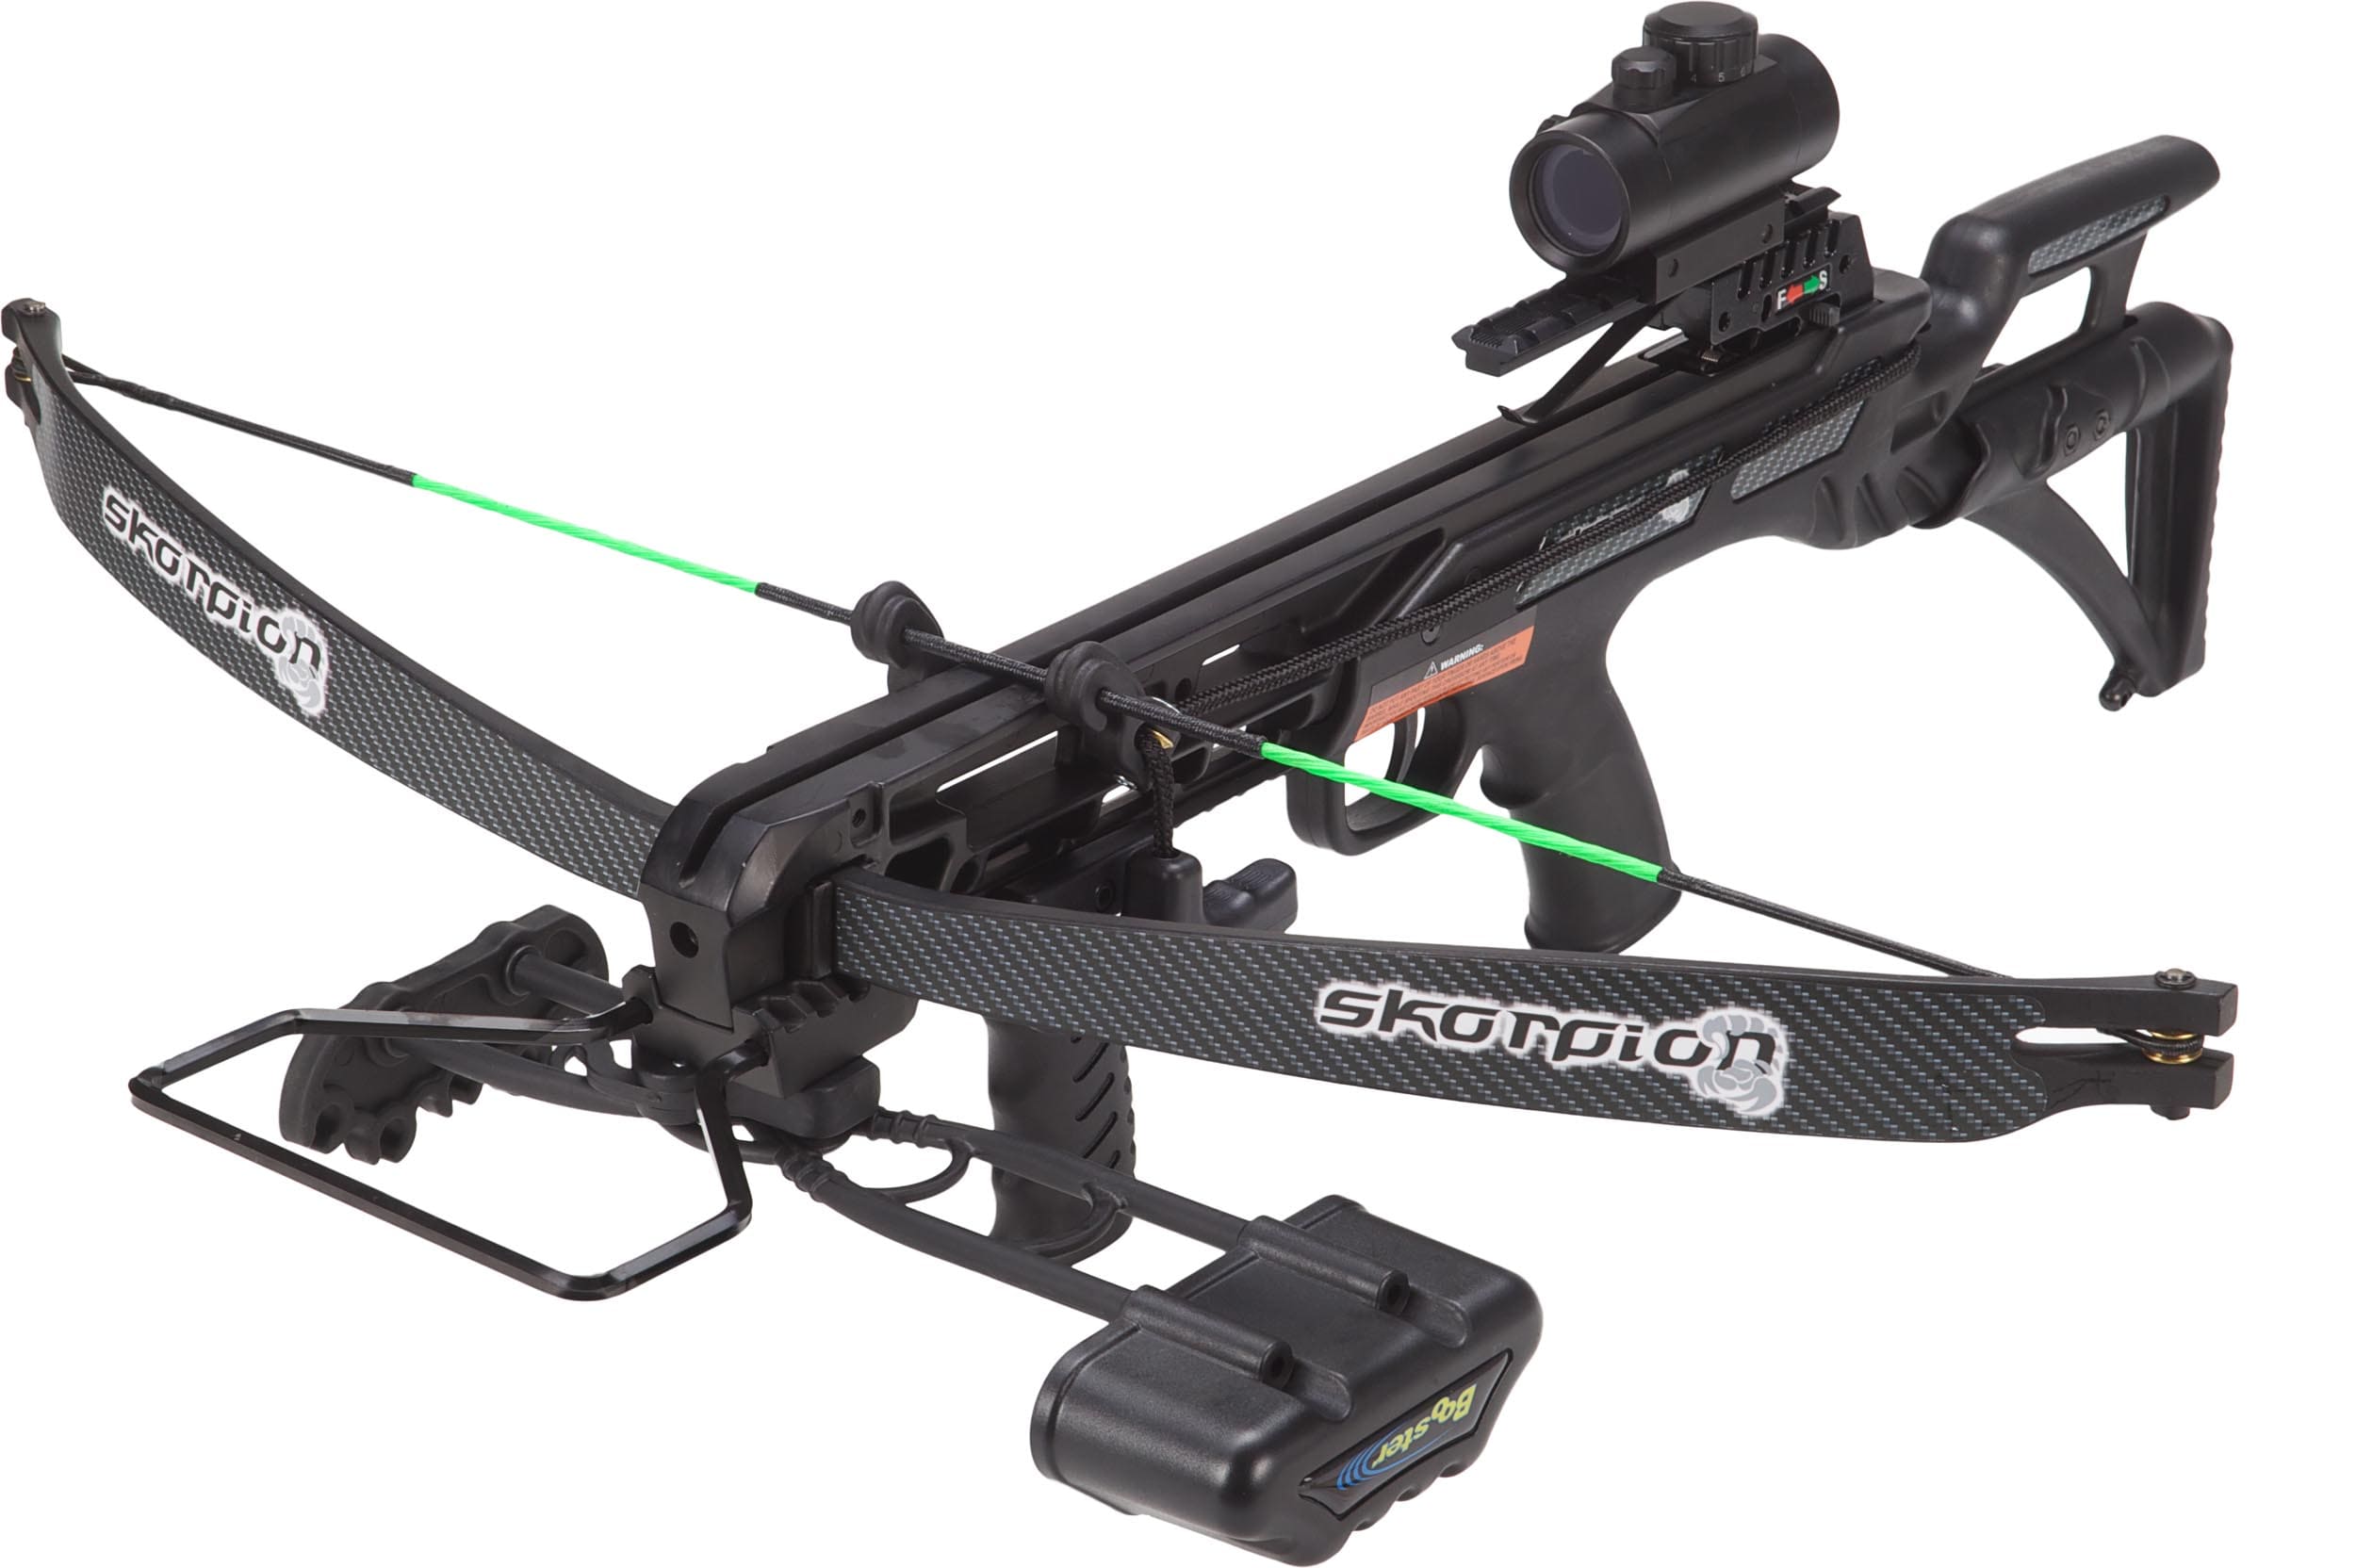 Traditional crossbow